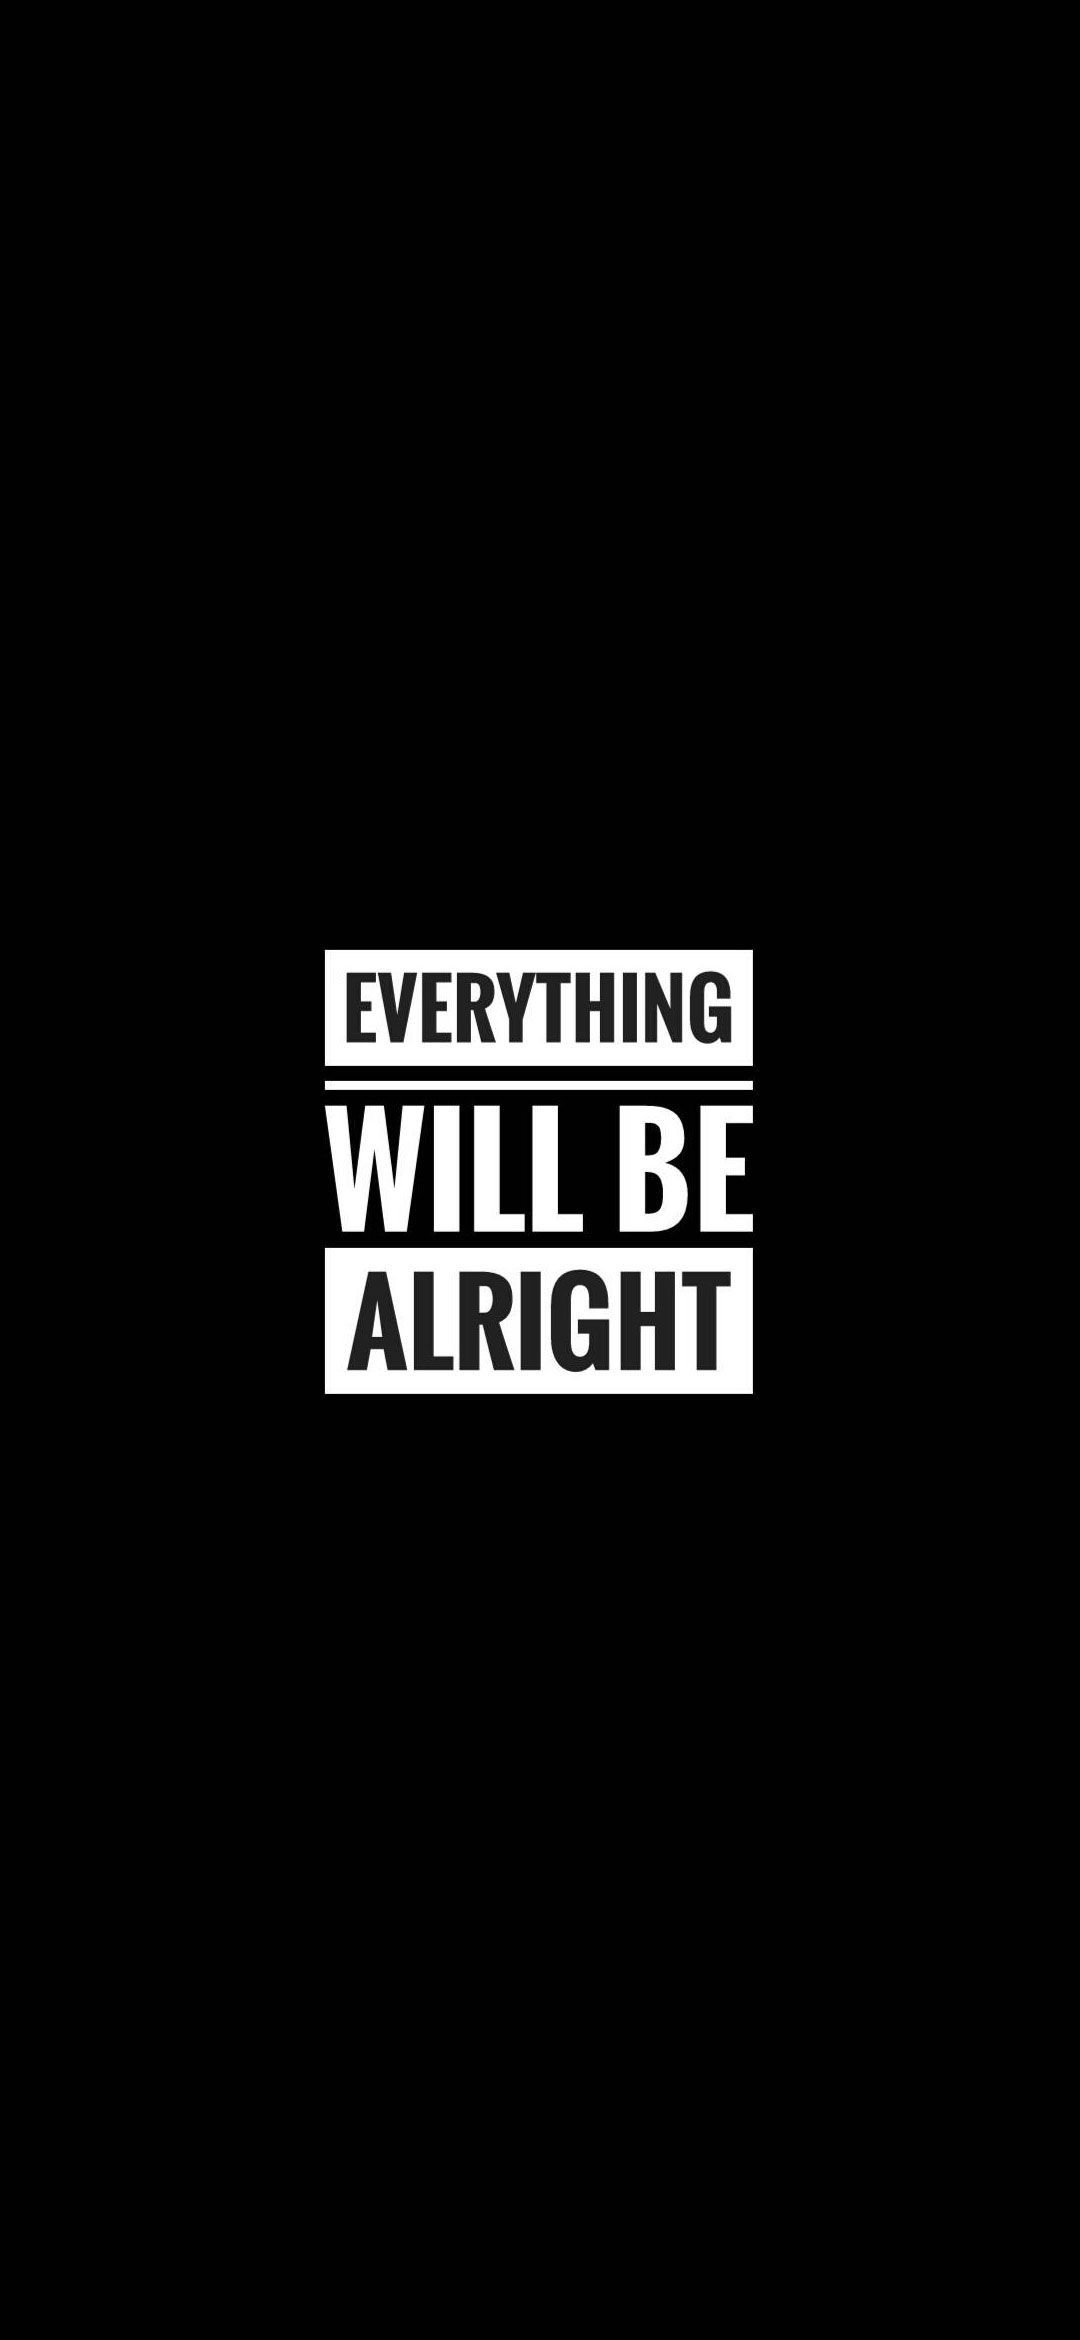 Everything Will Be Alright Wallpaper Free Everything Will Be Alright Background